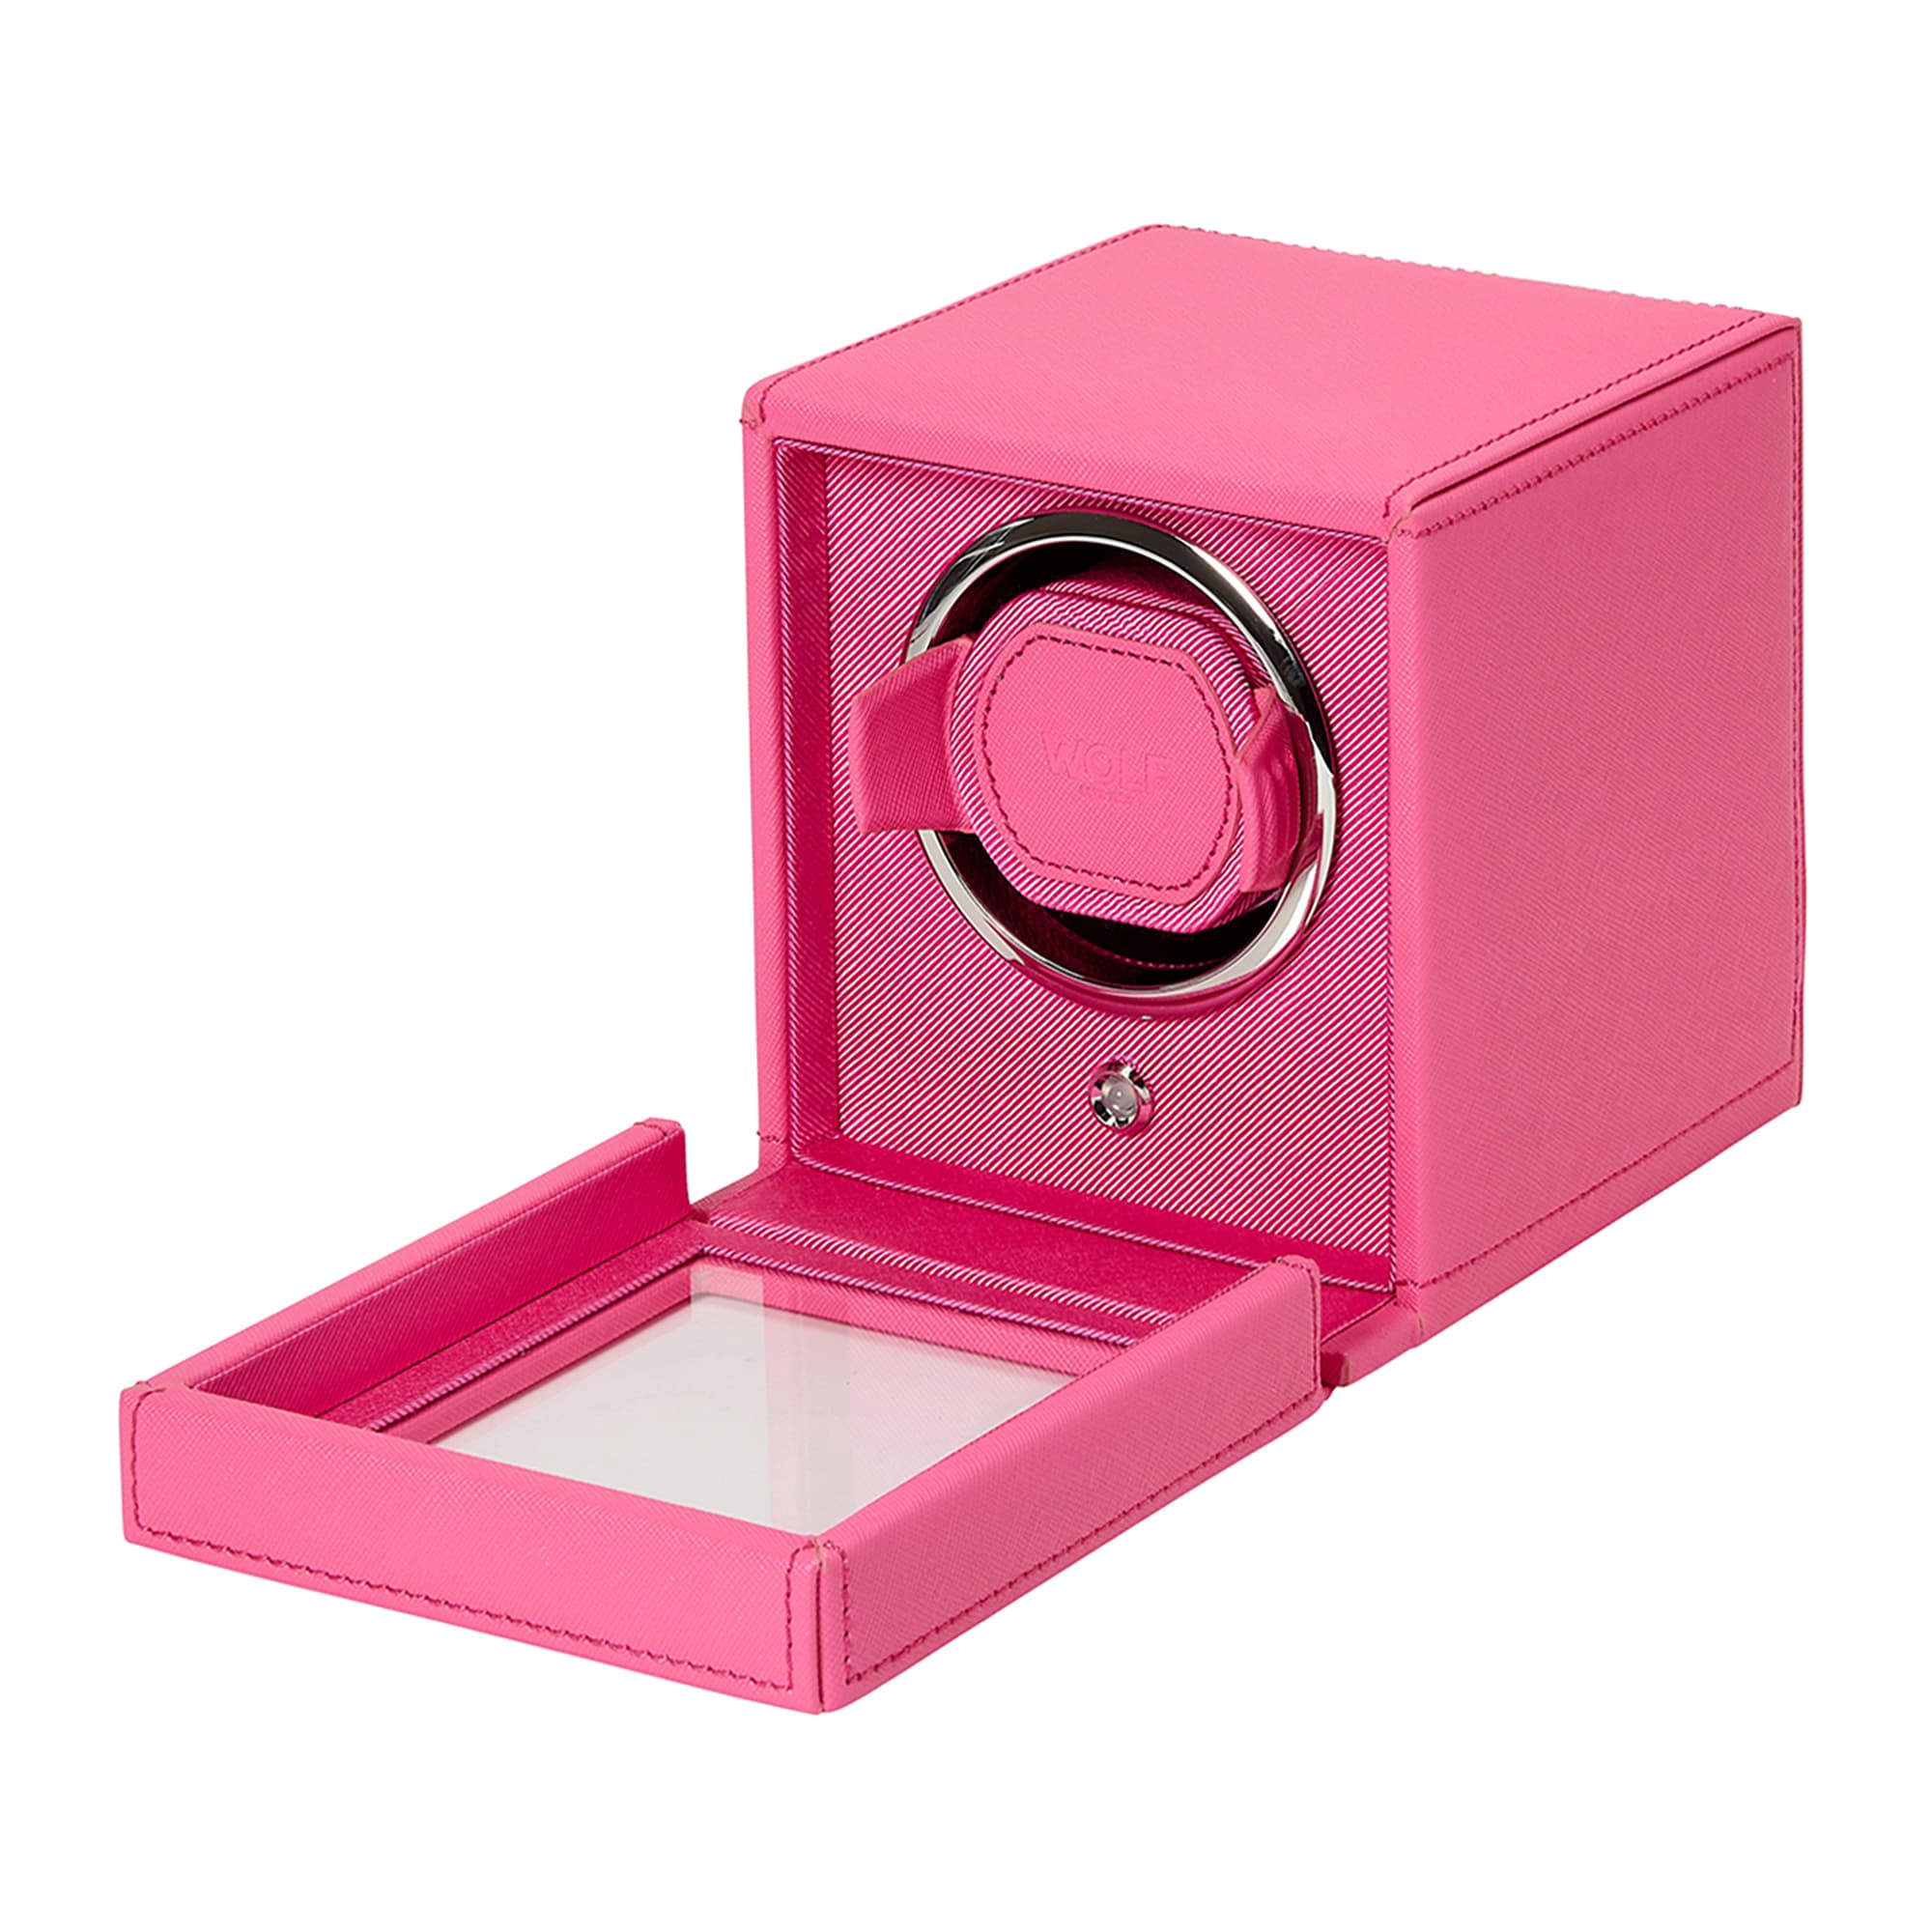 Wolf-Cub-Single-Watch-Winder-with-Cover-Pink-461190-3